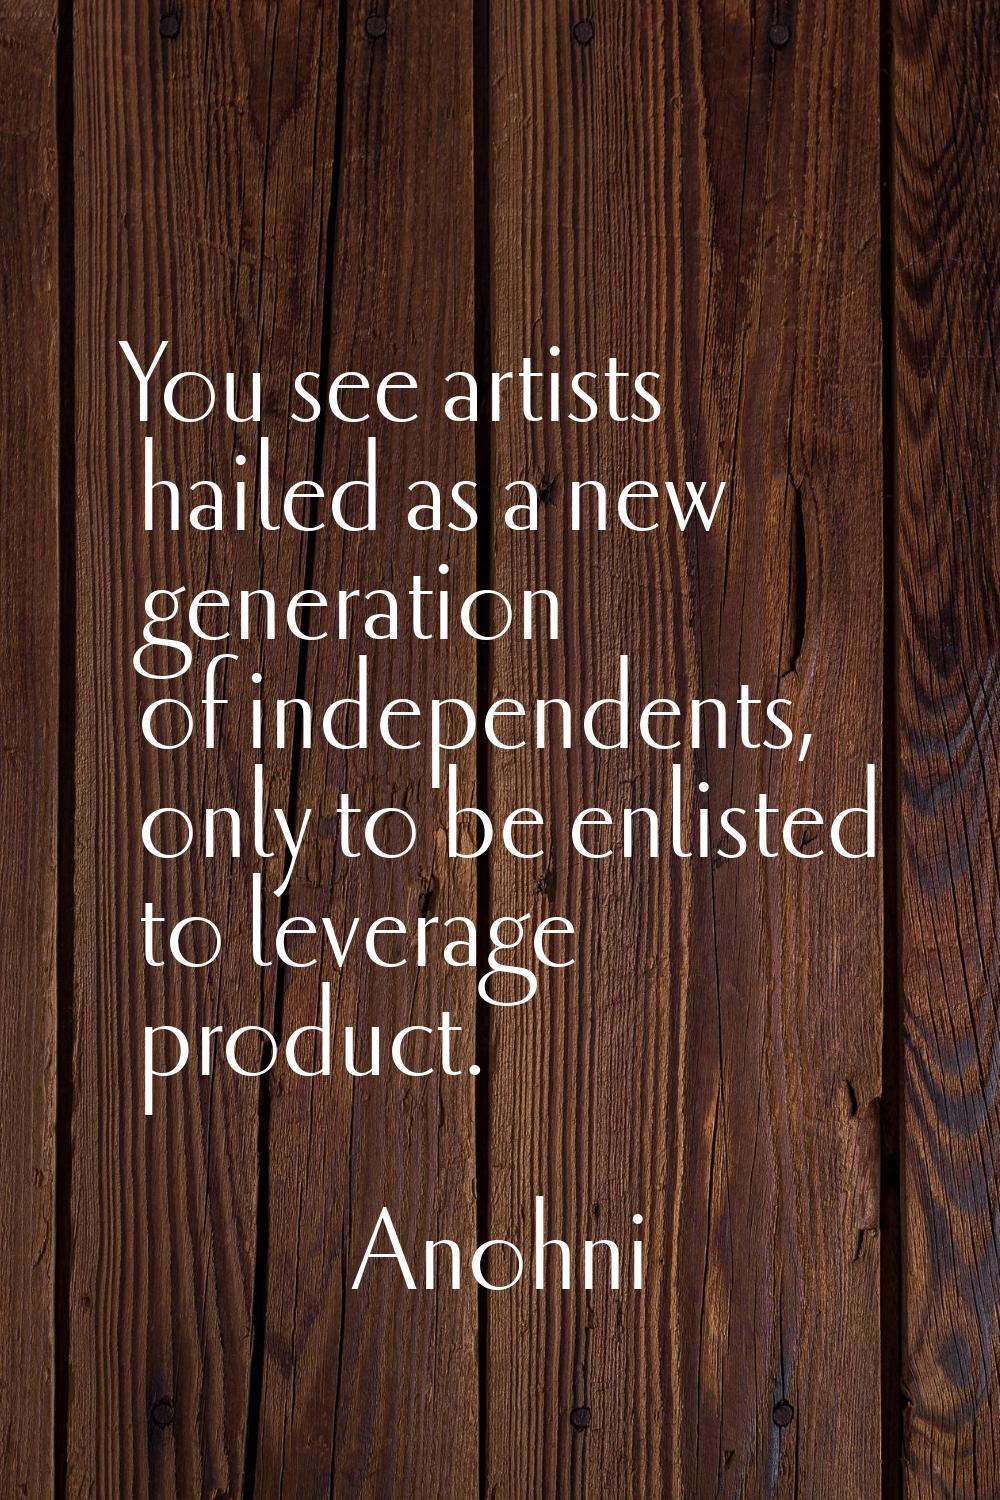 You see artists hailed as a new generation of independents, only to be enlisted to leverage product